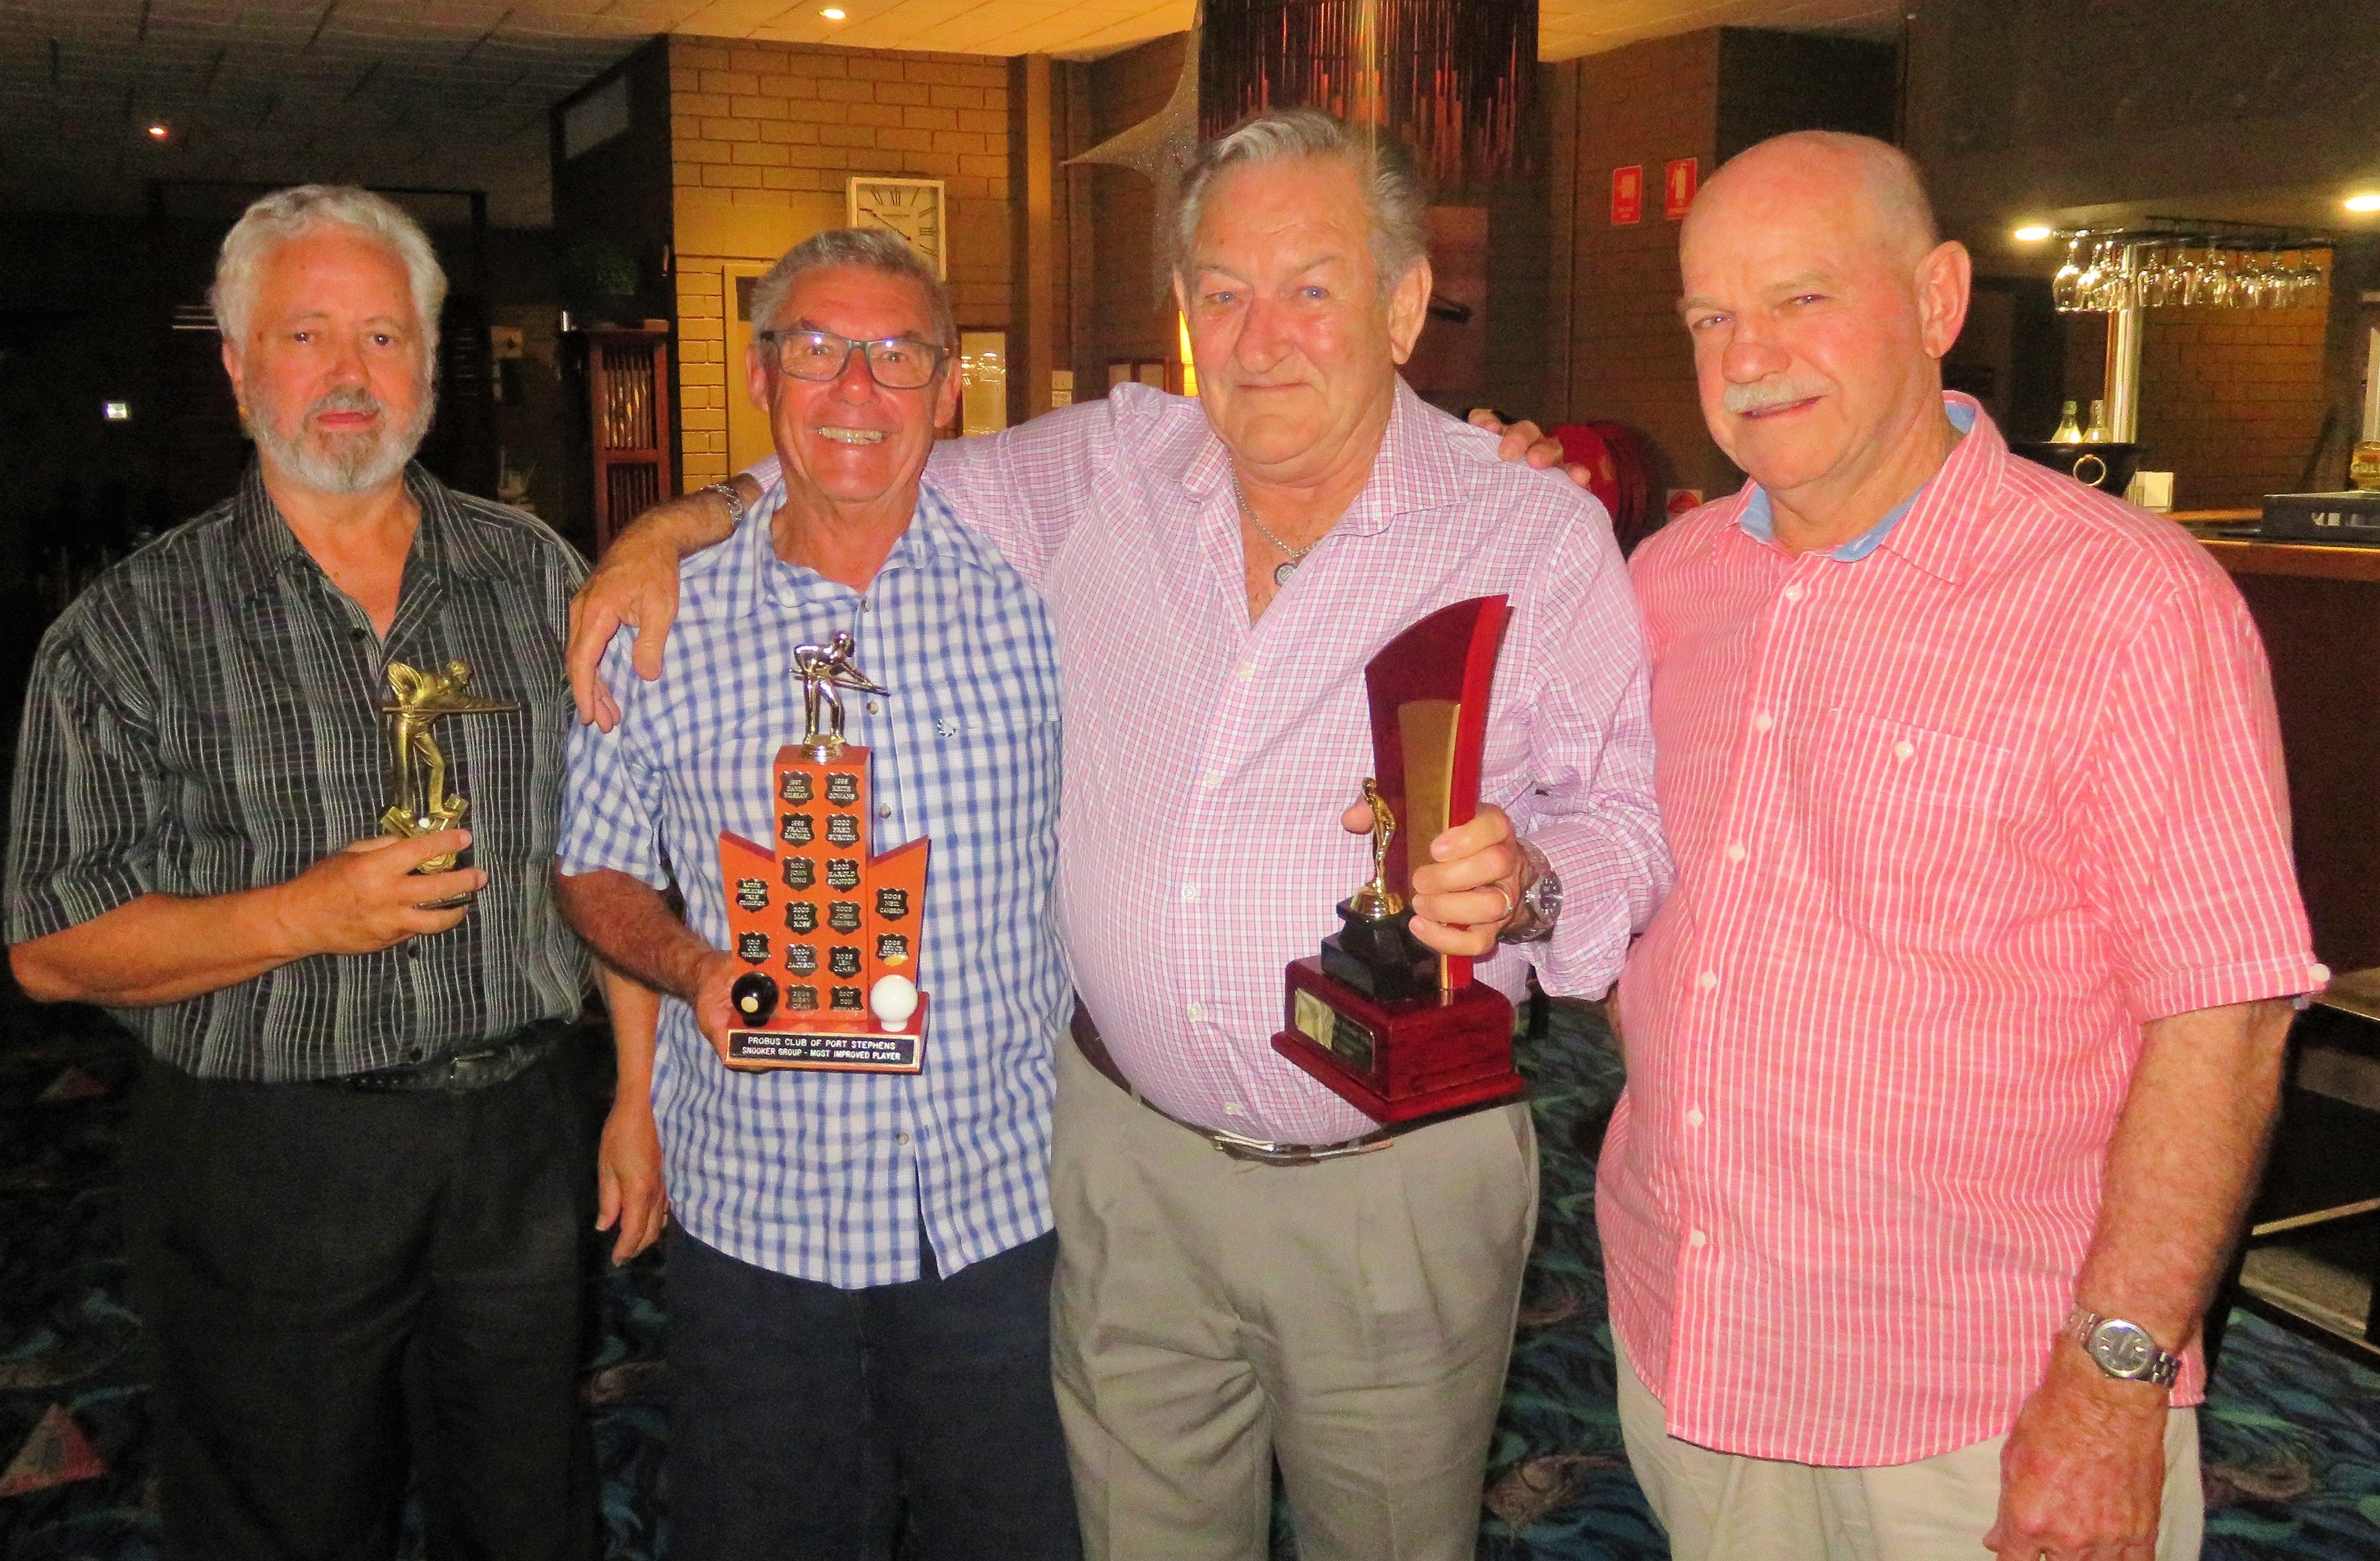 Snooker Presentation: Malcolm Craddock, Roy Cambell, Pete Curry and Dave Linguard. Photos by Ann Gibson